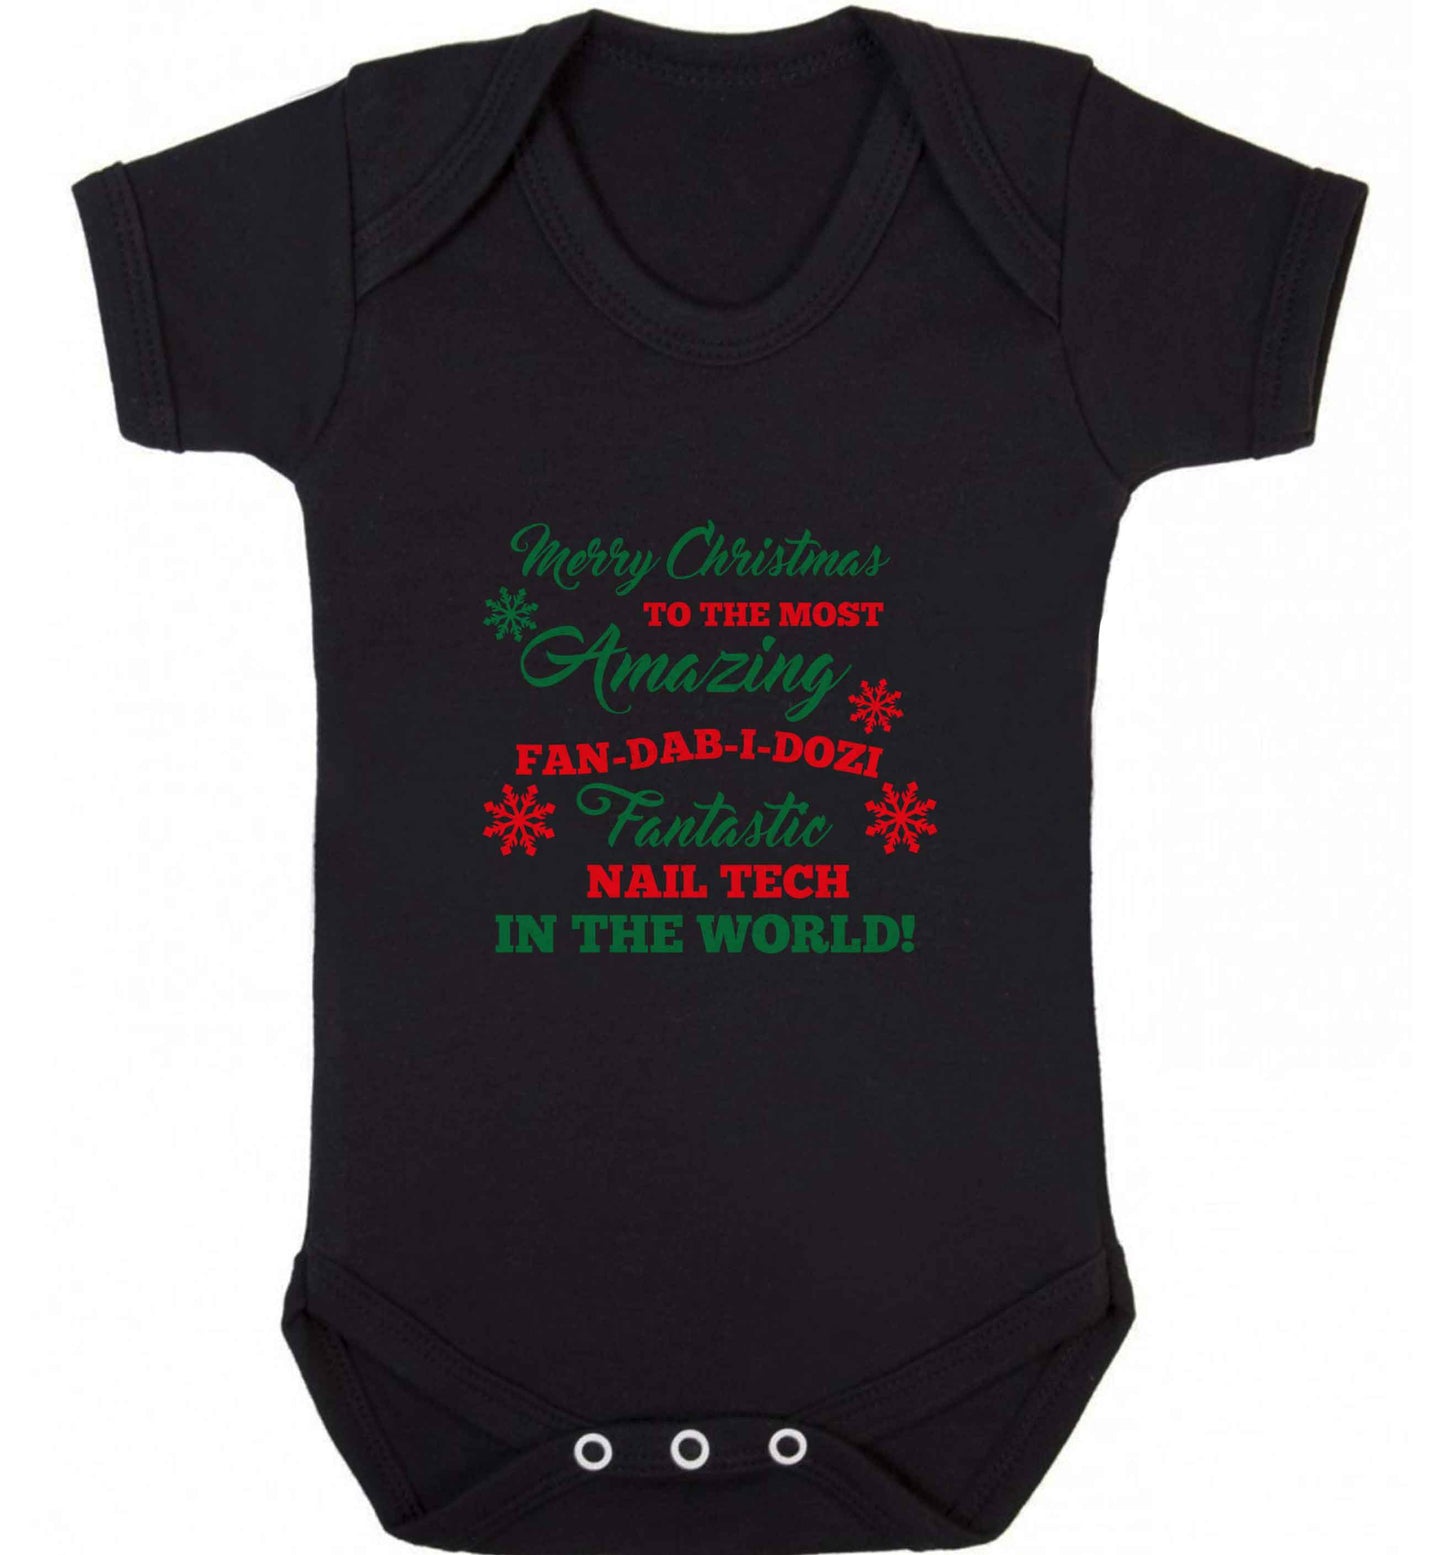 Merry Christmas to the most amazing fan-dab-i-dozi fantasic nail technician in the world baby vest black 18-24 months